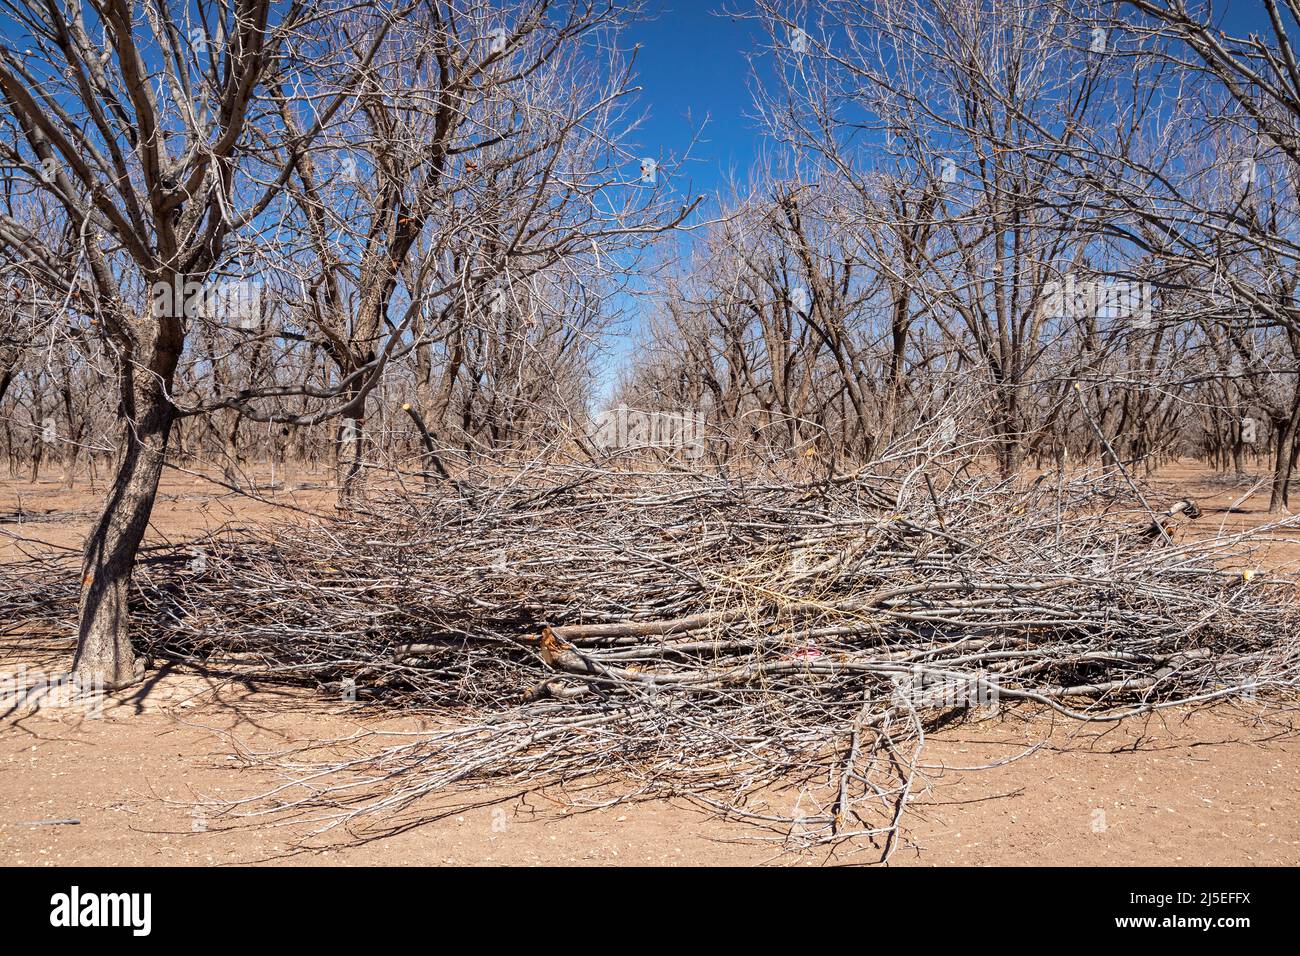 Artesia, New Mexico - Pecan tree pruning in late winter in the New Mexico desert. The water-hungry trees are growing in the midst of a severe dought i Stock Photo